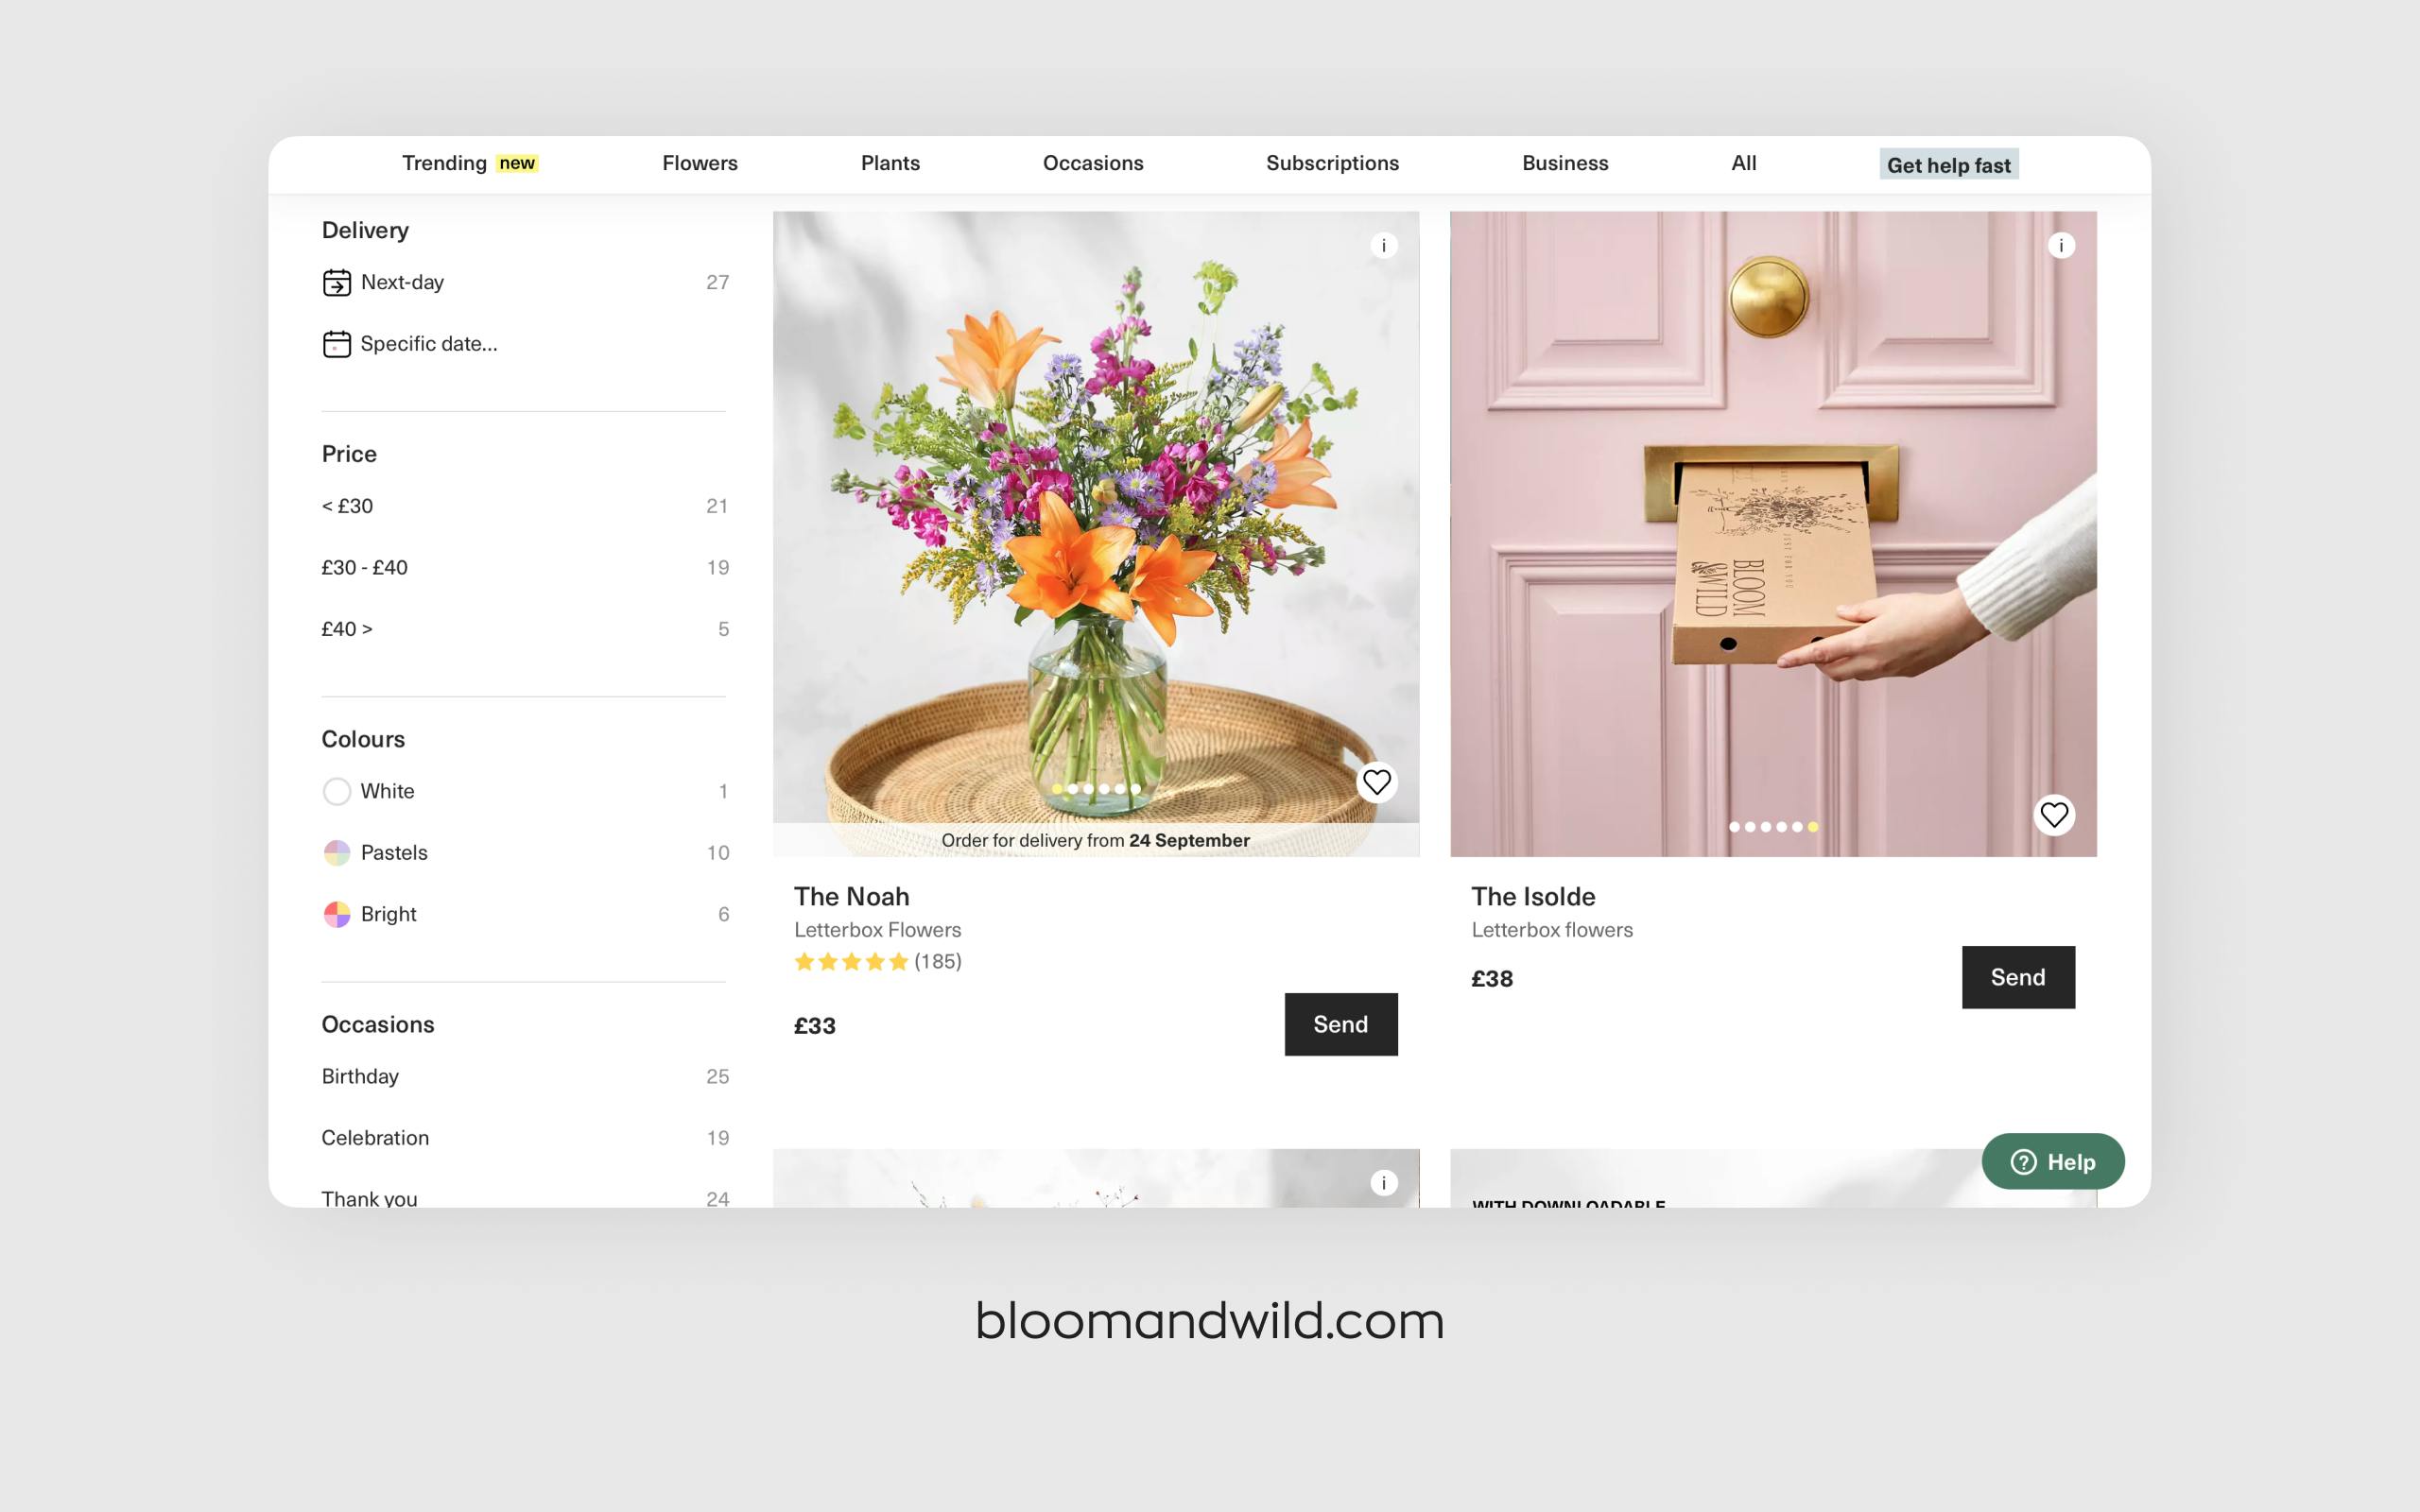 How Bloom & Wild managed to overcome startup challenges